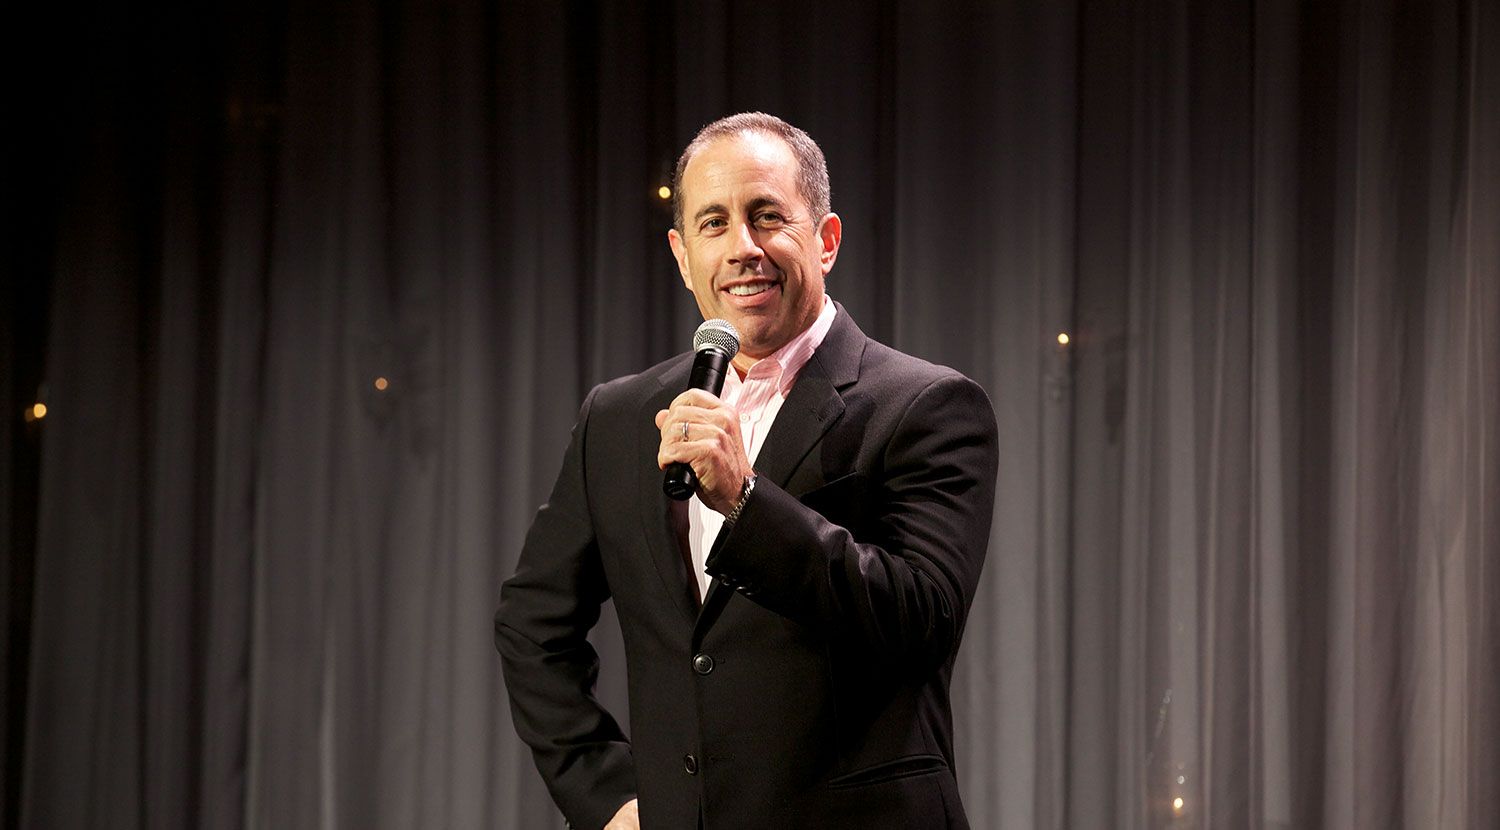 Jerry Seinfeld shares his experience with the TM technique at the Gala